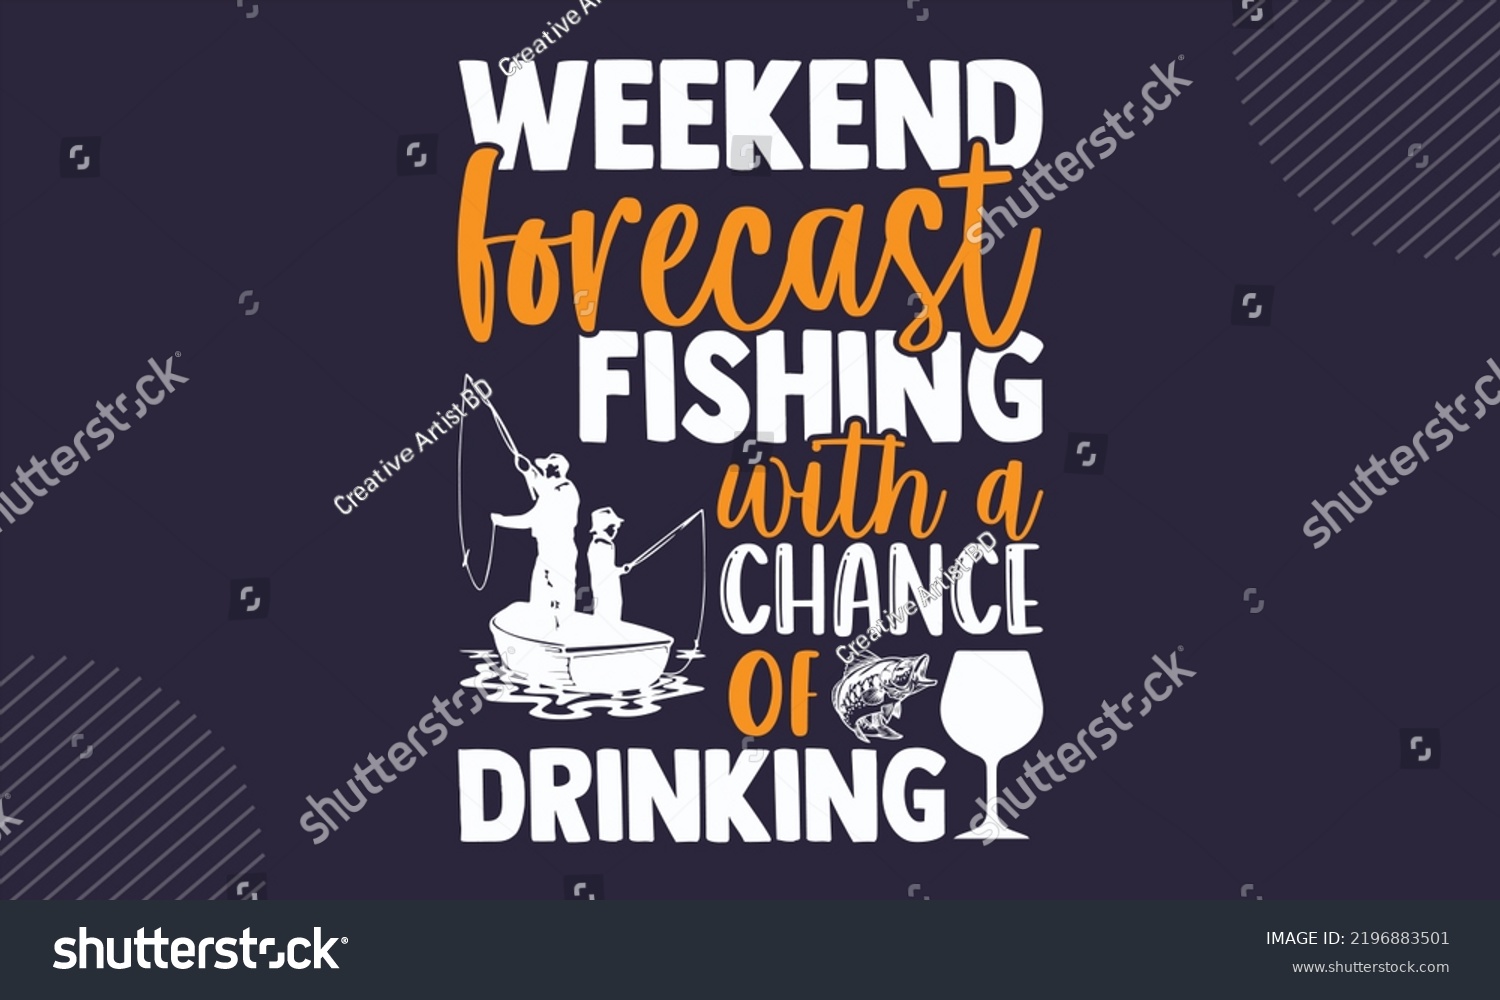 SVG of Weekend Forecast Fishing With A Chance Of Drinking - Fishing T shirt Design, Hand drawn vintage illustration with hand-lettering and decoration elements, Cut Files for Cricut Svg, Digital Download svg